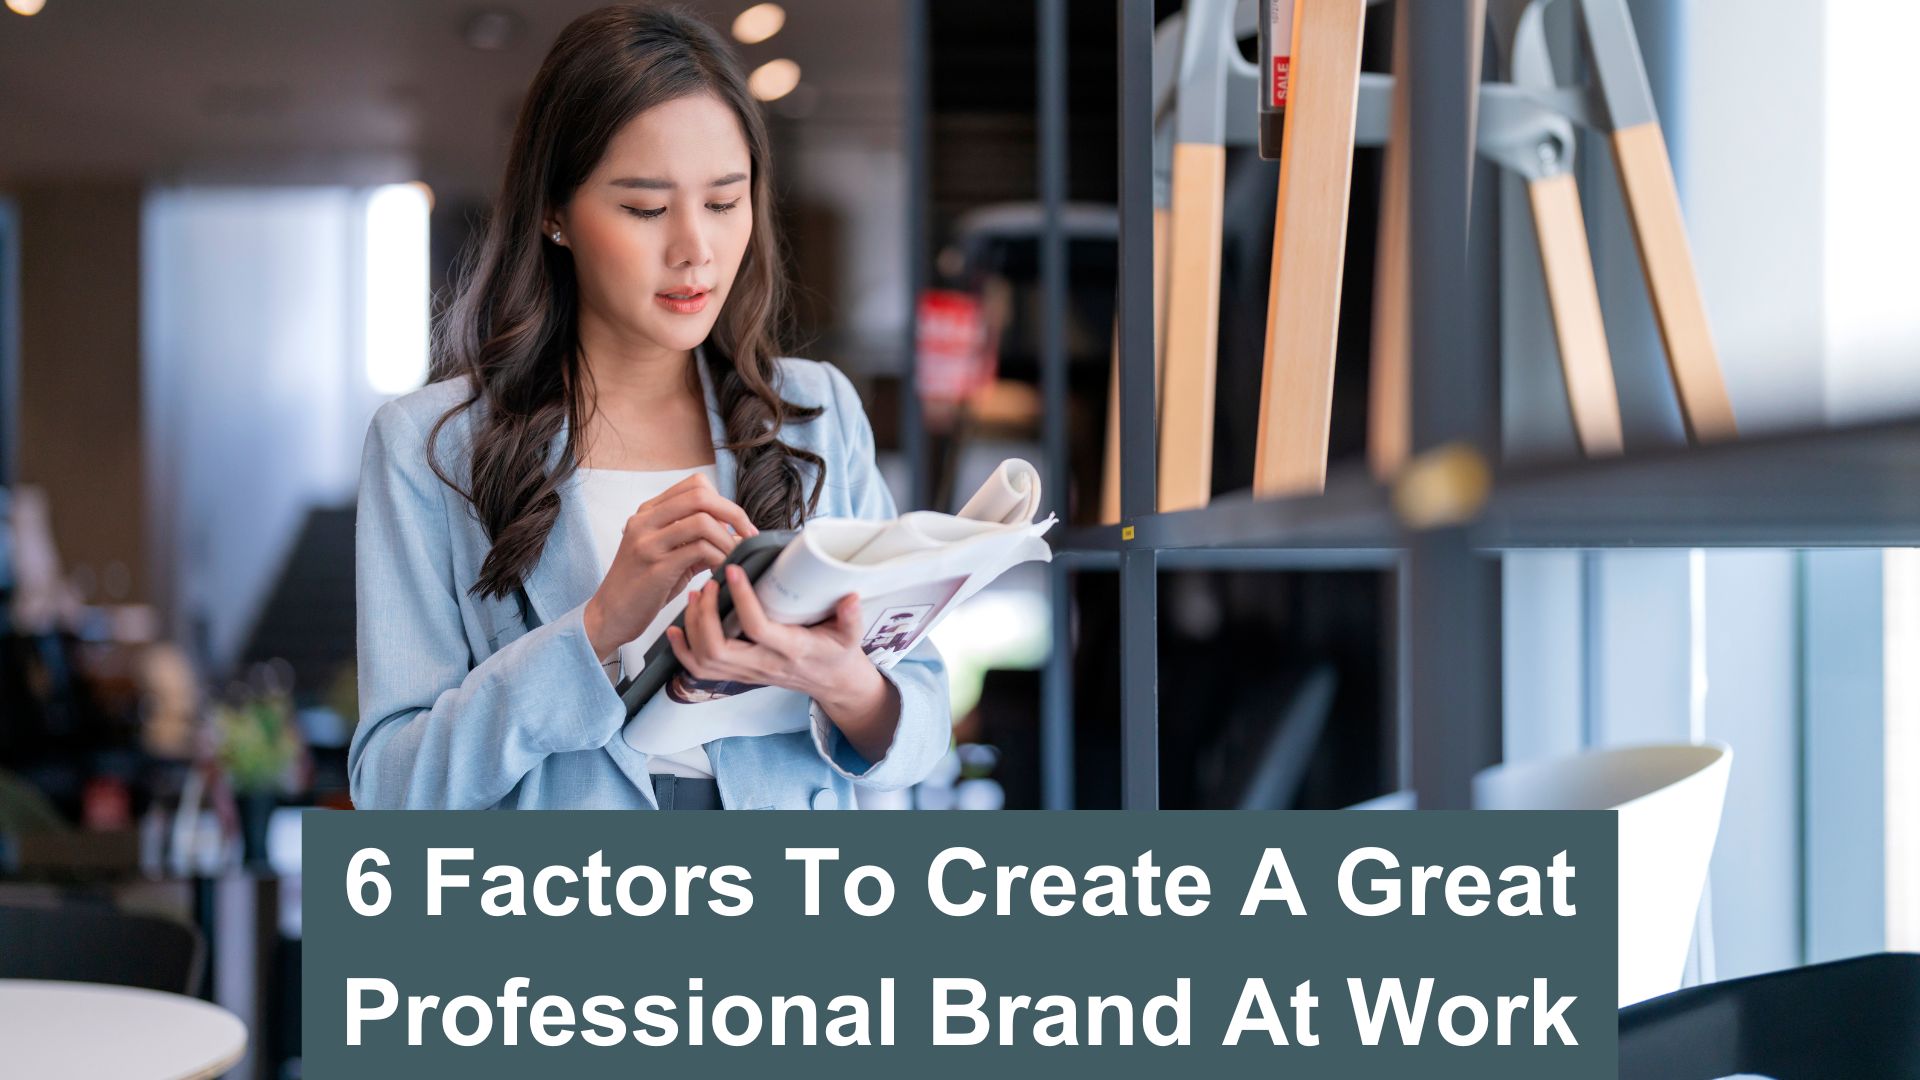 6 Factors to Create a Great Professional Brand at Work